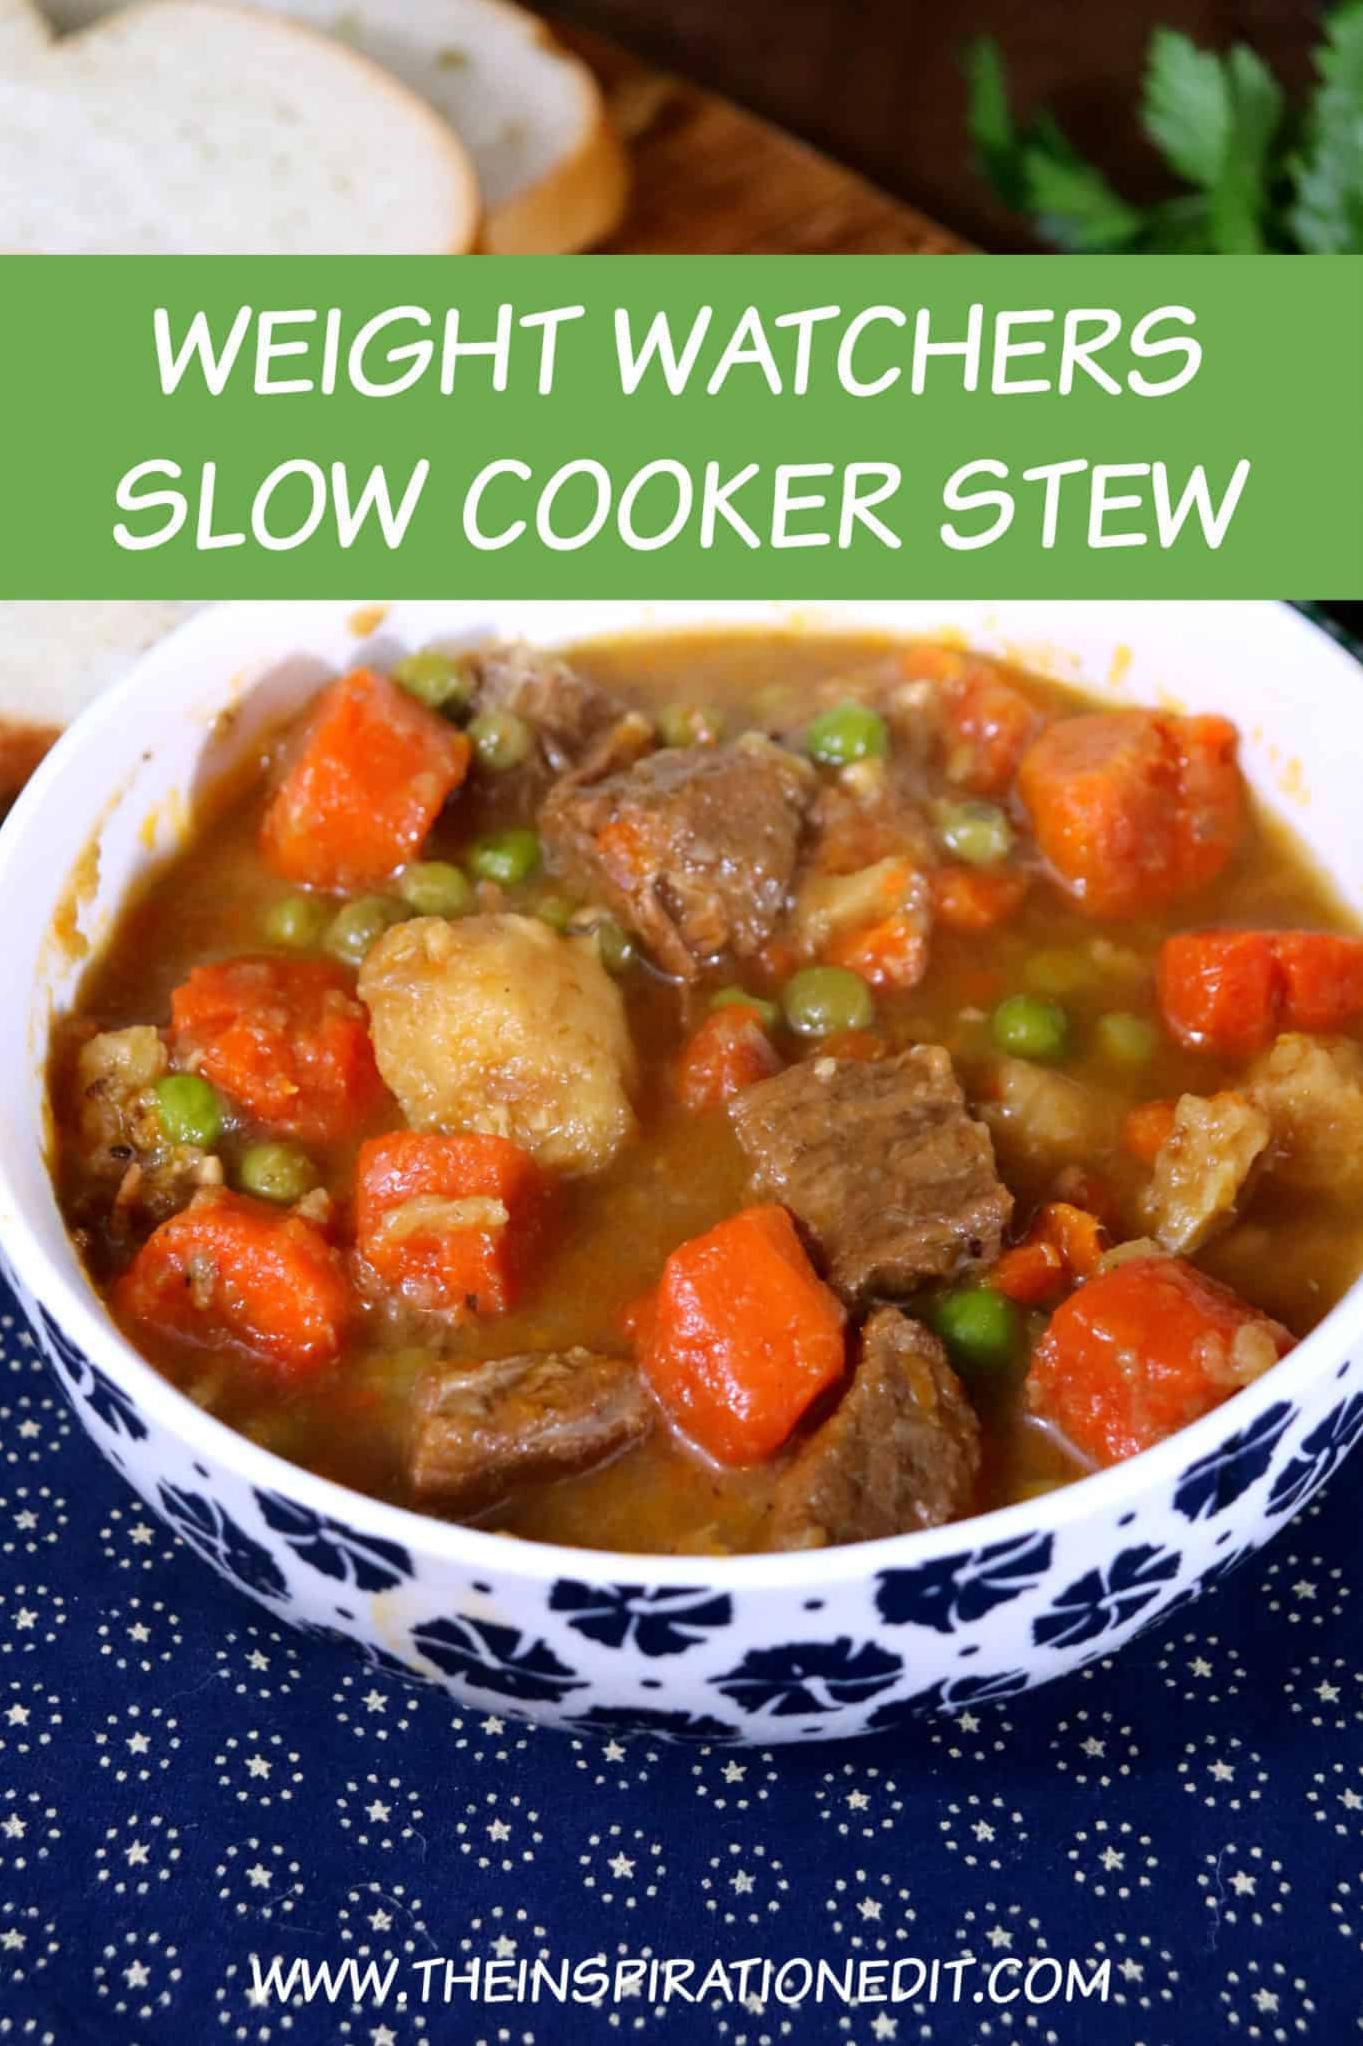 Warm your Soul with This Delicious Irish Stew Recipe